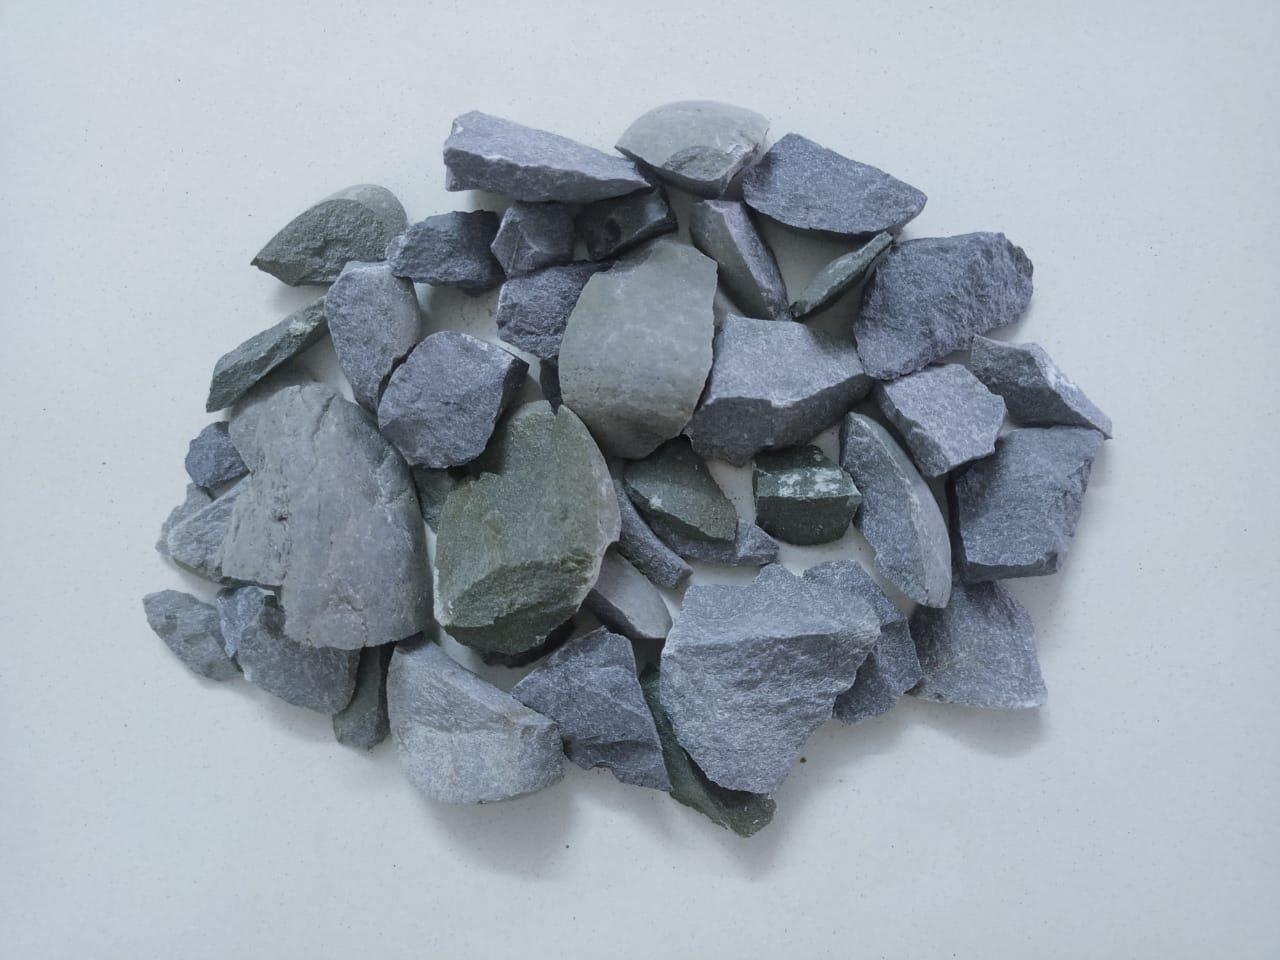 Wholsale crushed stone aggregate chips and stone gravels grey hard stone crushed aggregate per ton price in IND